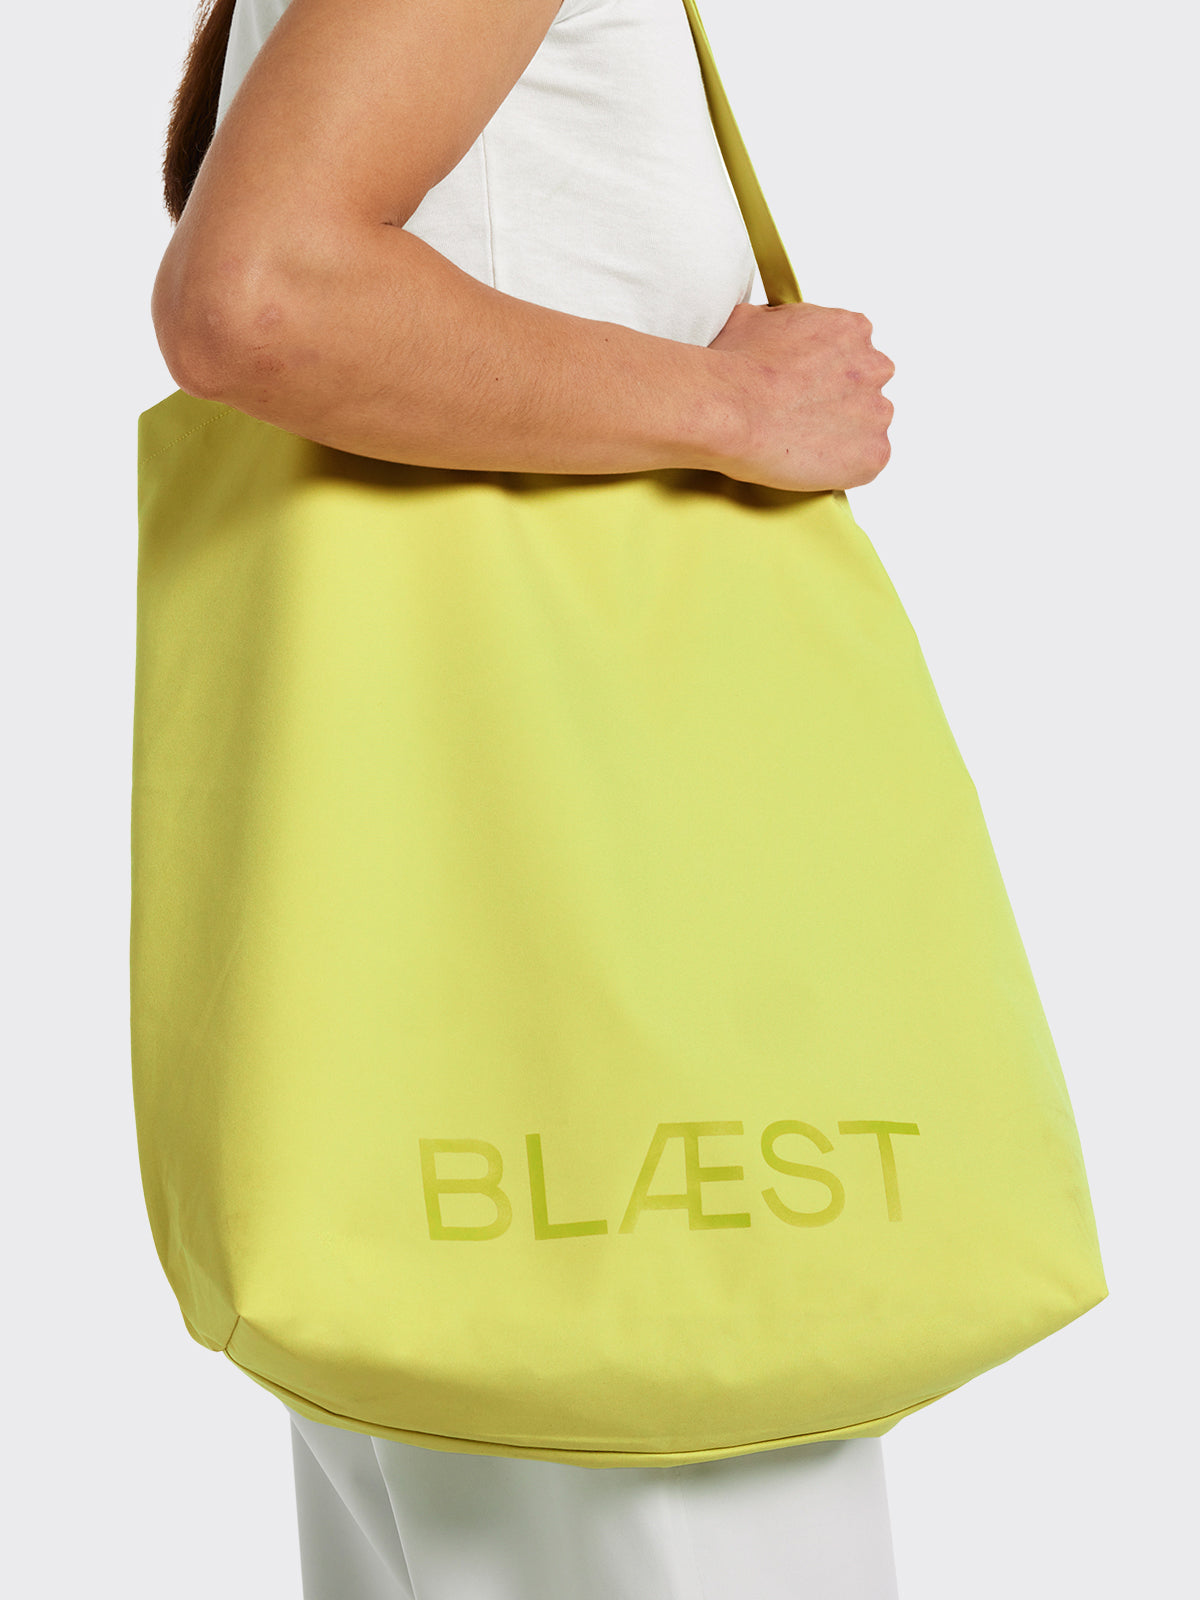 Moa tote bag from Blæst in the color Muted Lime